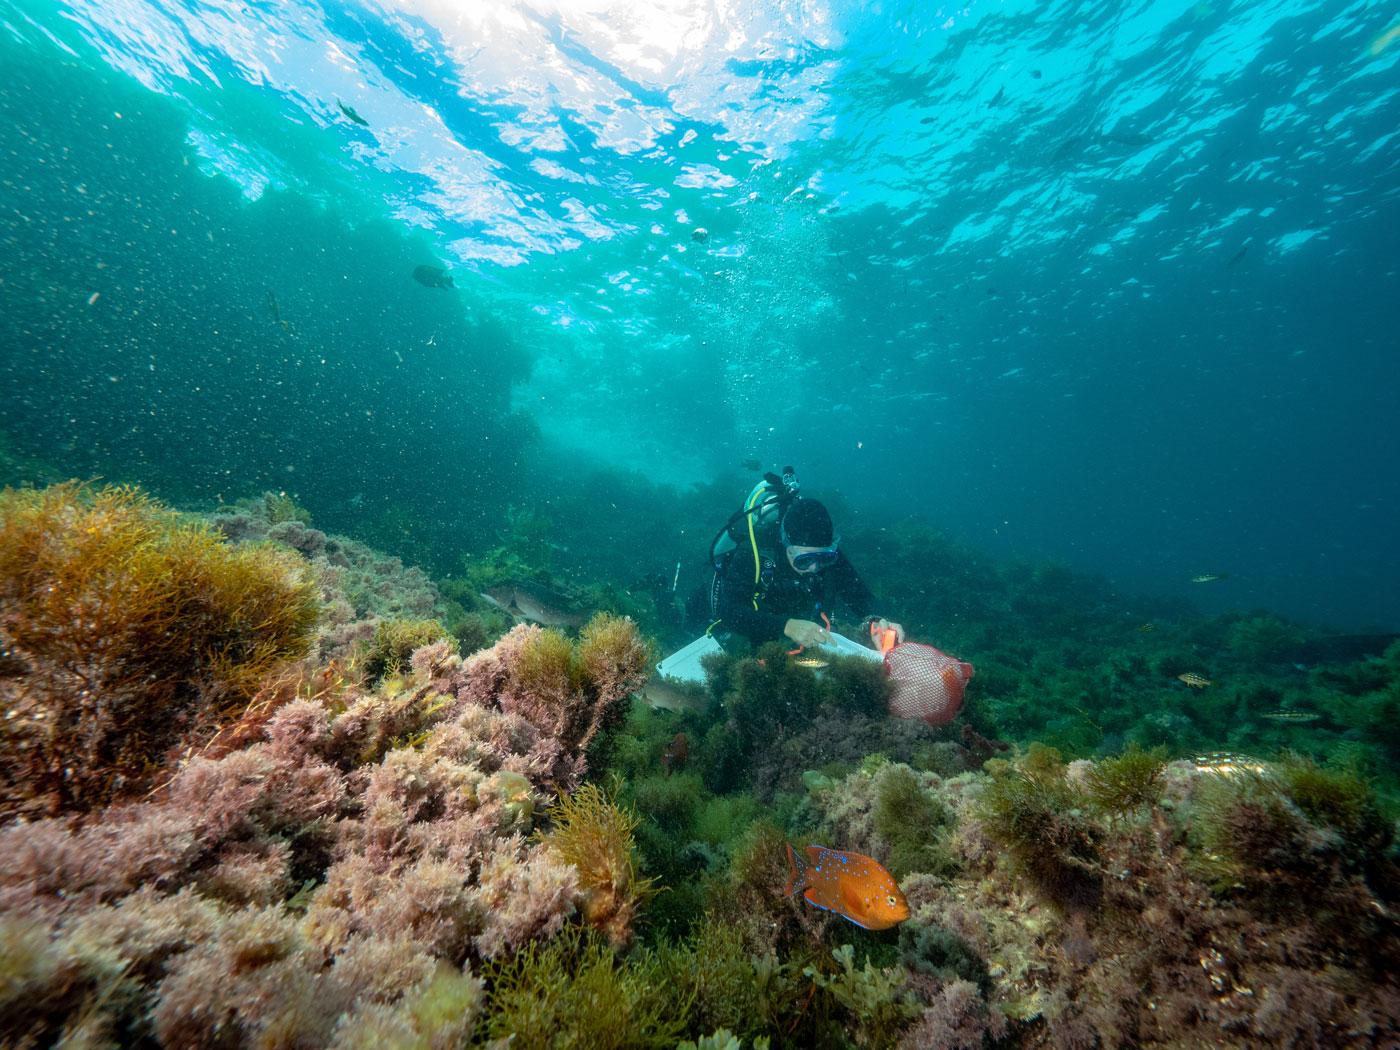 A research diver puts specimens in a mesh bag as a bright orange and blue-spotted fish swims across a reef in the foreground